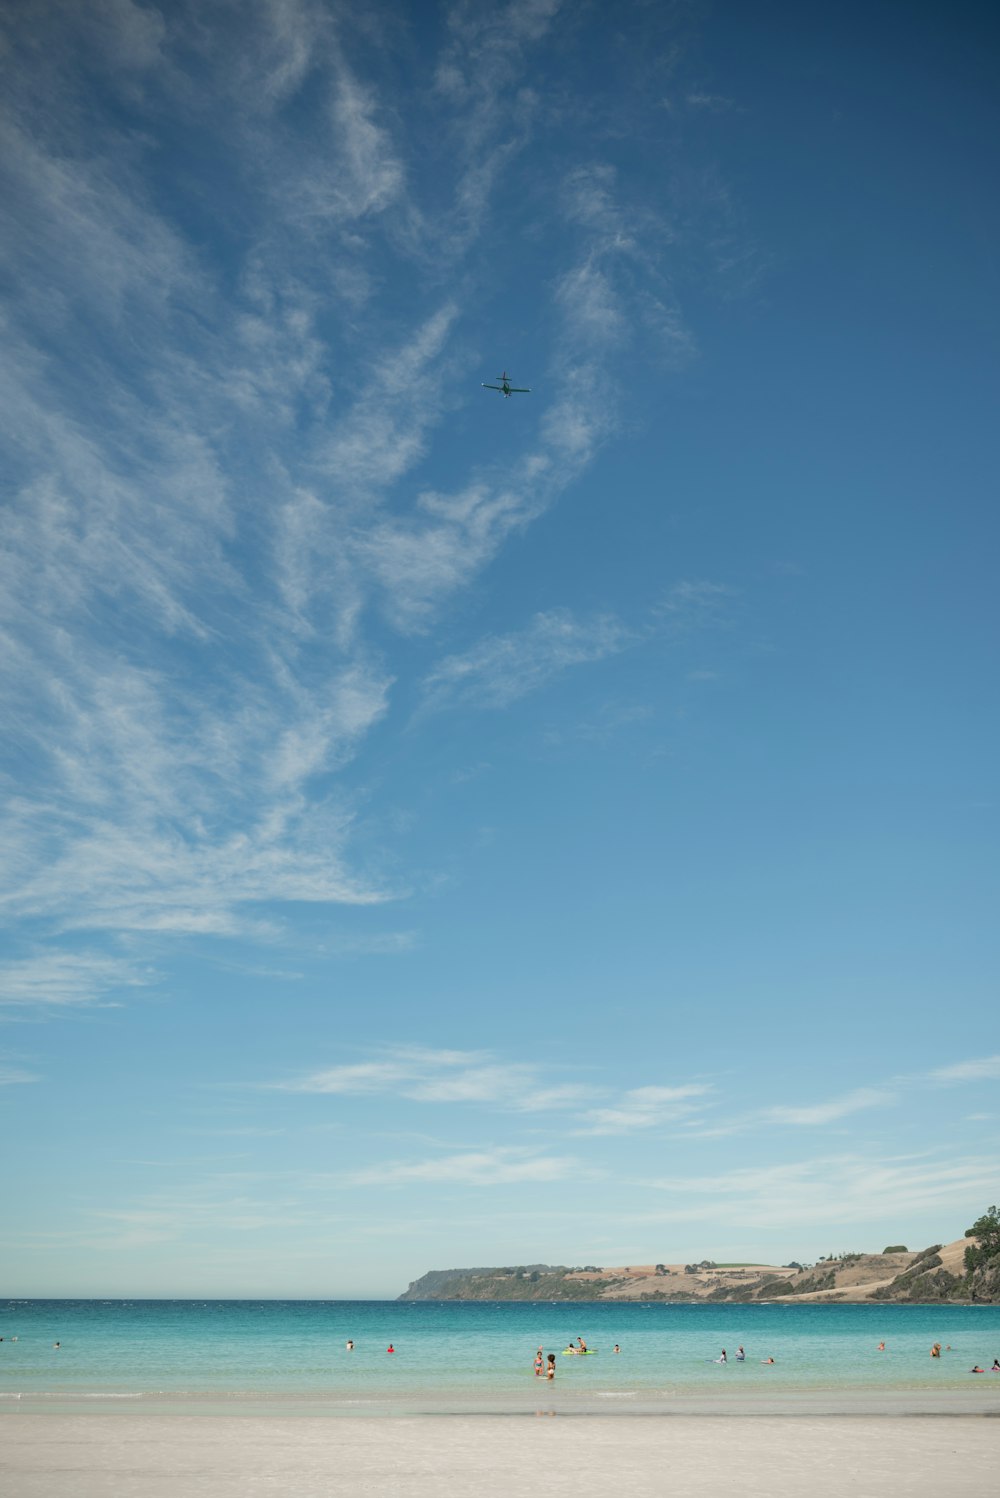 a plane flying over a beach with people in the water